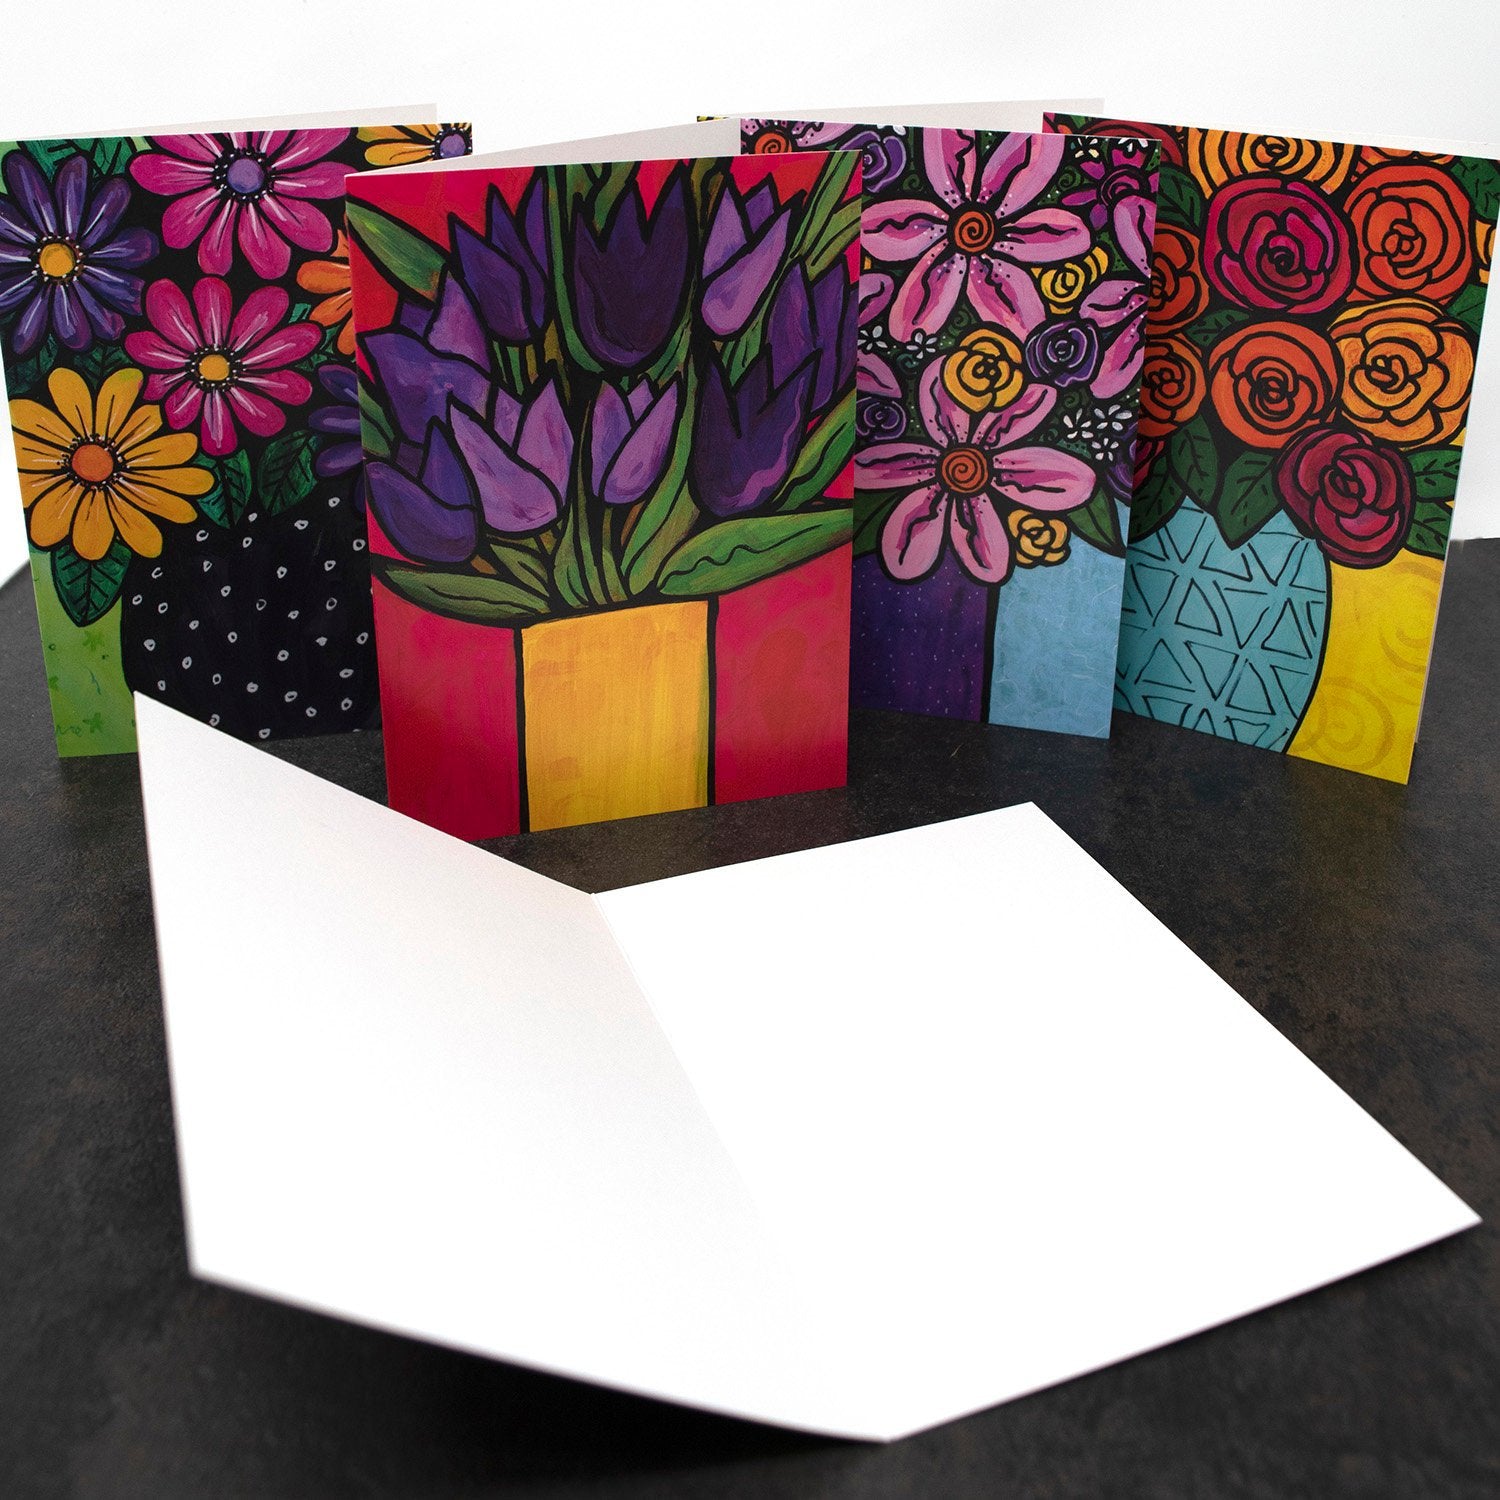 Blank Flowers Cards with Envelopes - Flower Cards for Thank You, Birthday, Wedding, Any Occasion 